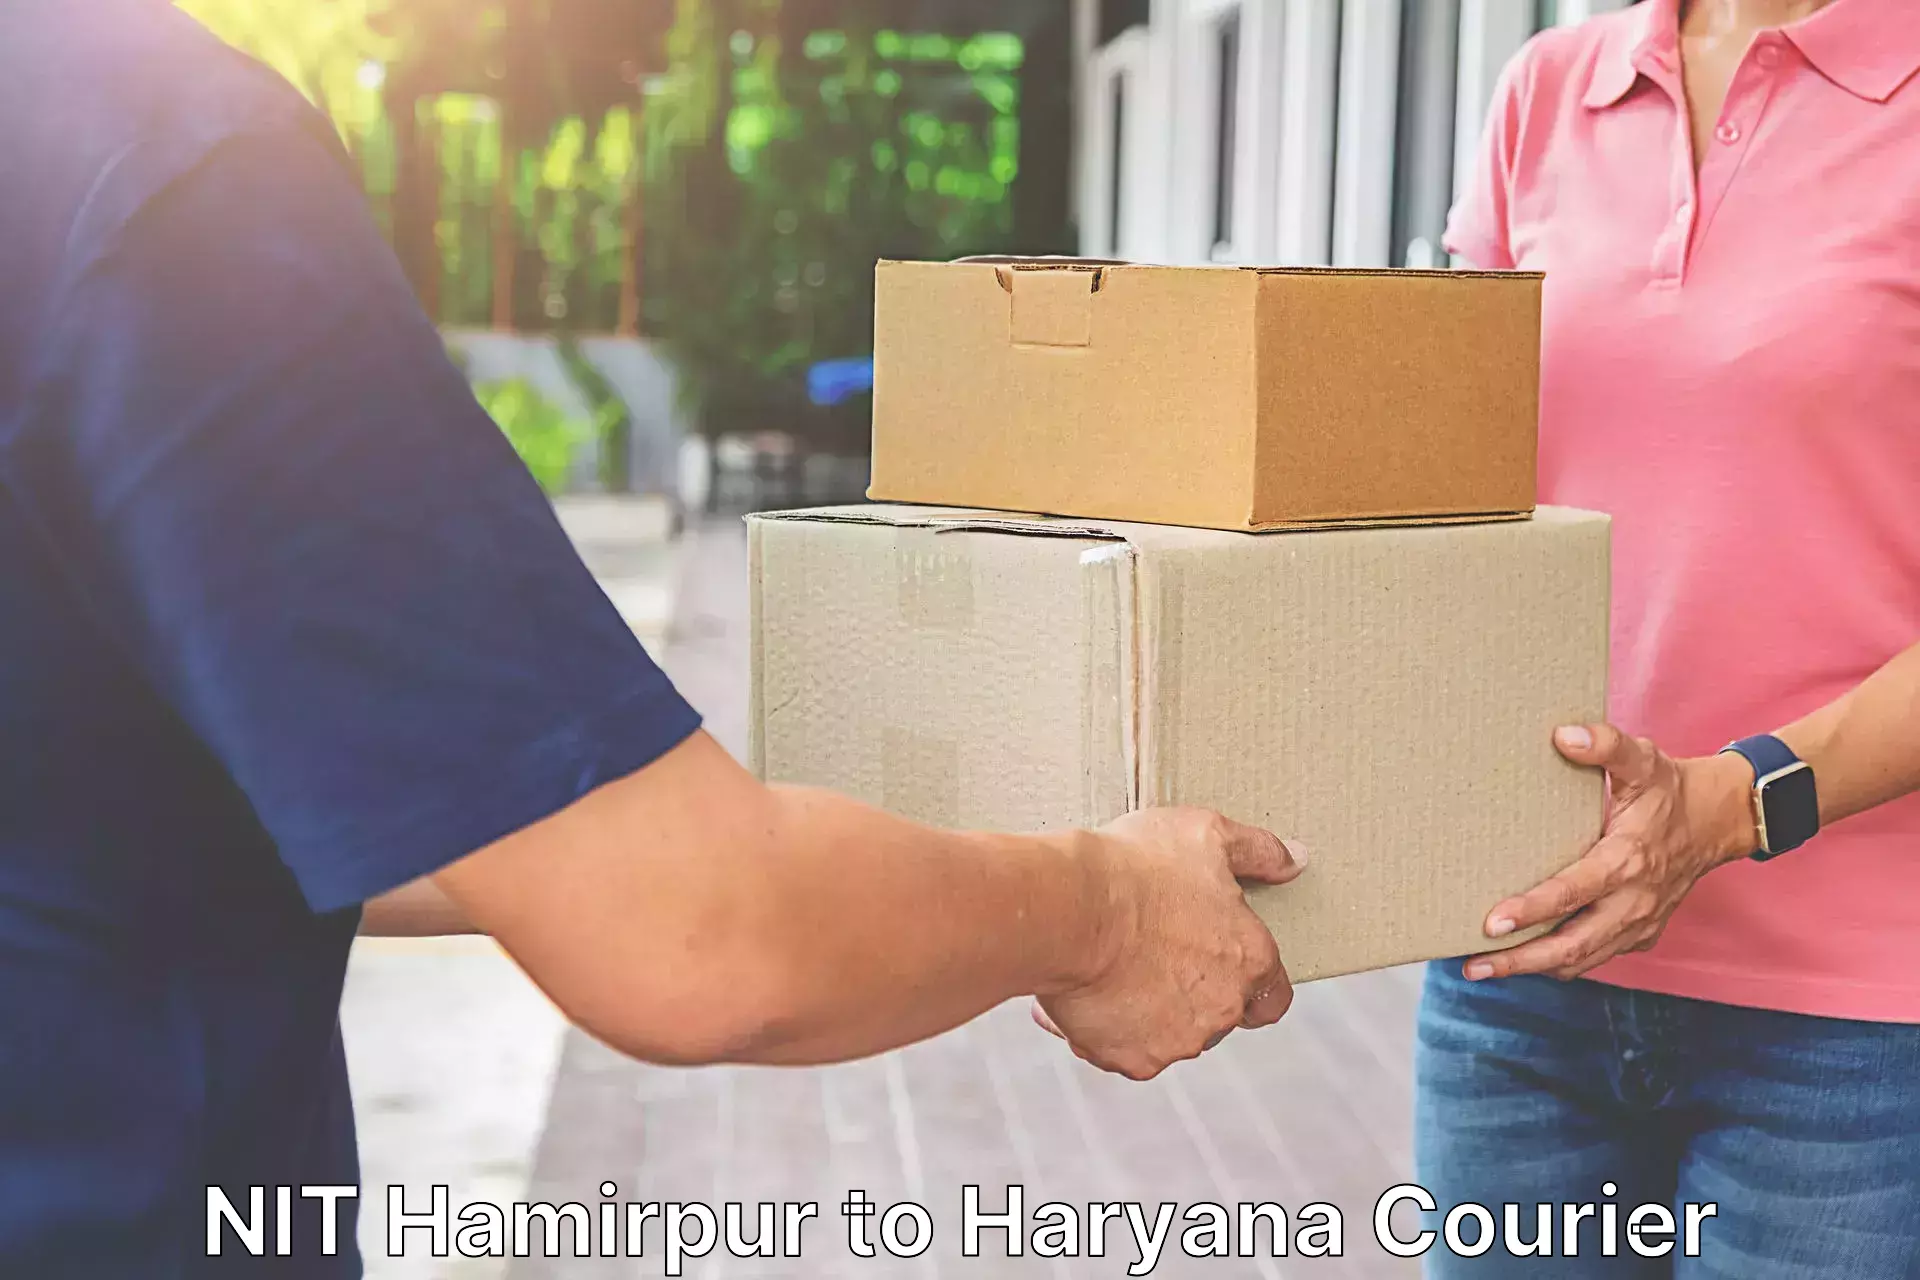 Multi-national courier services NIT Hamirpur to Dharuhera